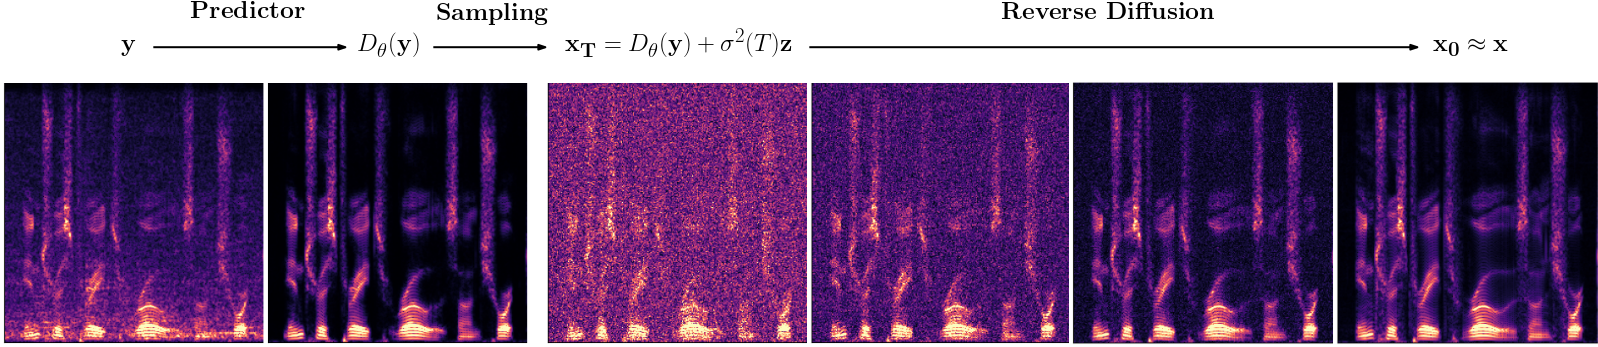 StoRM inference process on a spectrogram. A predictive model is first used to get a estimate of the clean speech, with some possible distortions and resiudla noise. The diffusion generative model then uses this estimate as the initial point for a reverse process learns to generate clean speech in an iterative fashion starting from the corrupted signal xT.